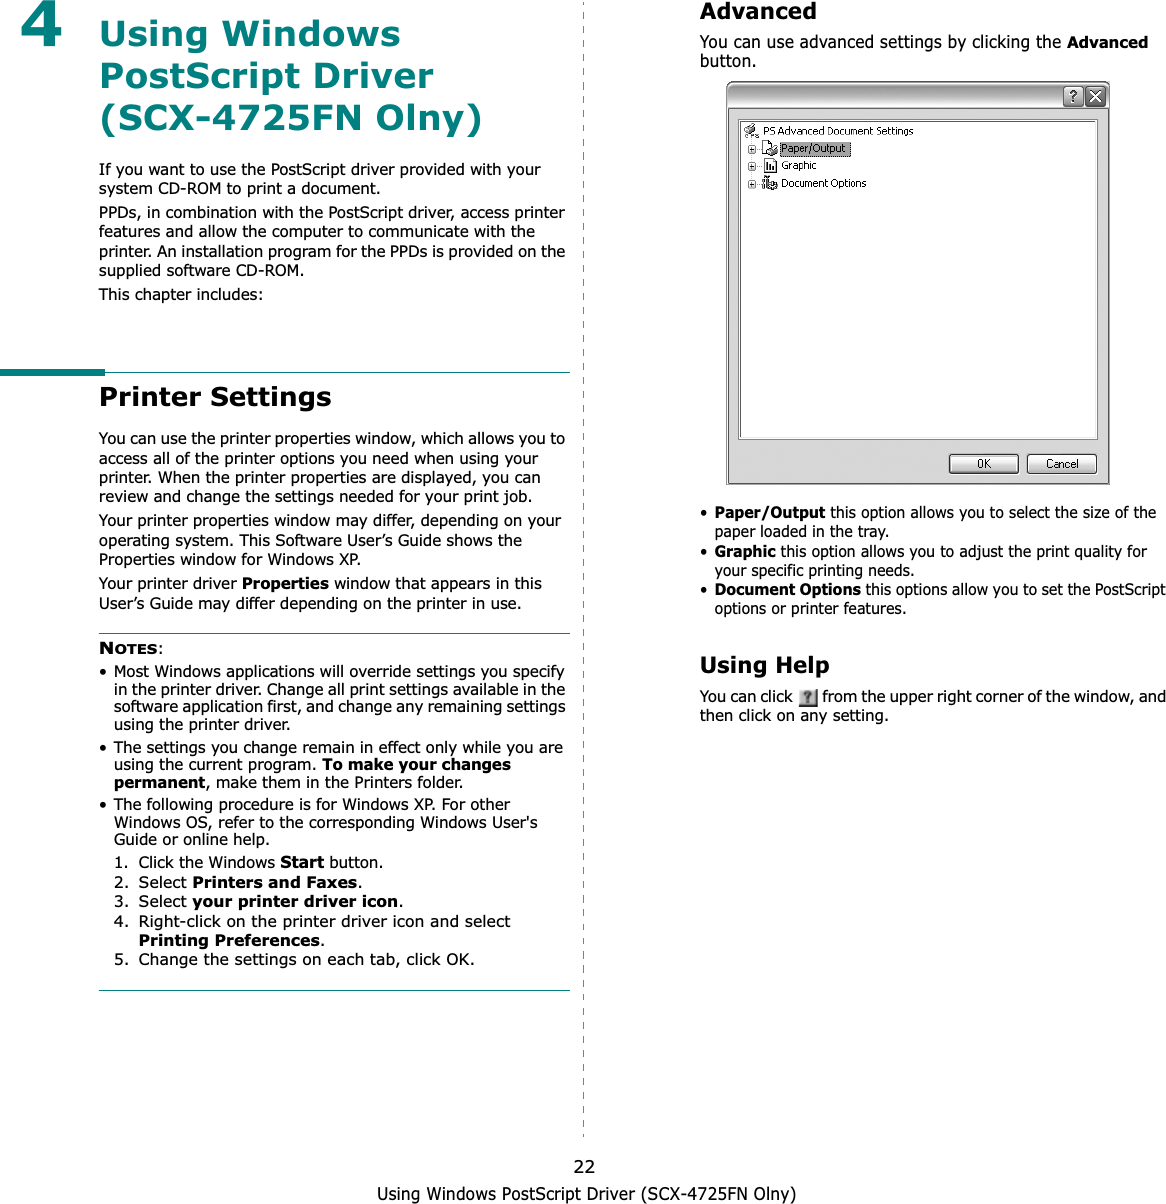 Using Windows PostScript Driver (SCX-4725FN Olny)224Using Windows PostScript Driver(SCX-4725FN Olny)If you want to use the PostScript driver provided with your system CD-ROM to print a document.PPDs, in combination with the PostScript driver, access printer features and allow the computer to communicate with the printer. An installation program for the PPDs is provided on the supplied software CD-ROM. This chapter includes:Printer SettingsYou can use the printer properties window, which allows you to access all of the printer options you need when using your printer. When the printer properties are displayed, you can review and change the settings needed for your print job. Your printer properties window may differ, depending on your operating system. This Software User’s Guide shows the Properties window for Windows XP.Your printer driver Properties window that appears in this User’s Guide may differ depending on the printer in use.NOTES:• Most Windows applications will override settings you specify in the printer driver. Change all print settings available in the software application first, and change any remaining settings using the printer driver. • The settings you change remain in effect only while you are using the current program. To make your changes permanent, make them in the Printers folder. • The following procedure is for Windows XP. For other Windows OS, refer to the corresponding Windows User&apos;s Guide or online help.1. Click the Windows Start button.2. Select Printers and Faxes.3. Select your printer driver icon.4. Right-click on the printer driver icon and select Printing Preferences.5. Change the settings on each tab, click OK.AdvancedYou can use advanced settings by clicking the Advancedbutton.•Paper/Output this option allows you to select the size of the paper loaded in the tray.•Graphicthis option allows you to adjust the print quality for your specific printing needs.•Document Optionsthis options allow you to set the PostScript options or printer features.Using HelpYou can click   from the upper right corner of the window, and then click on any setting. 